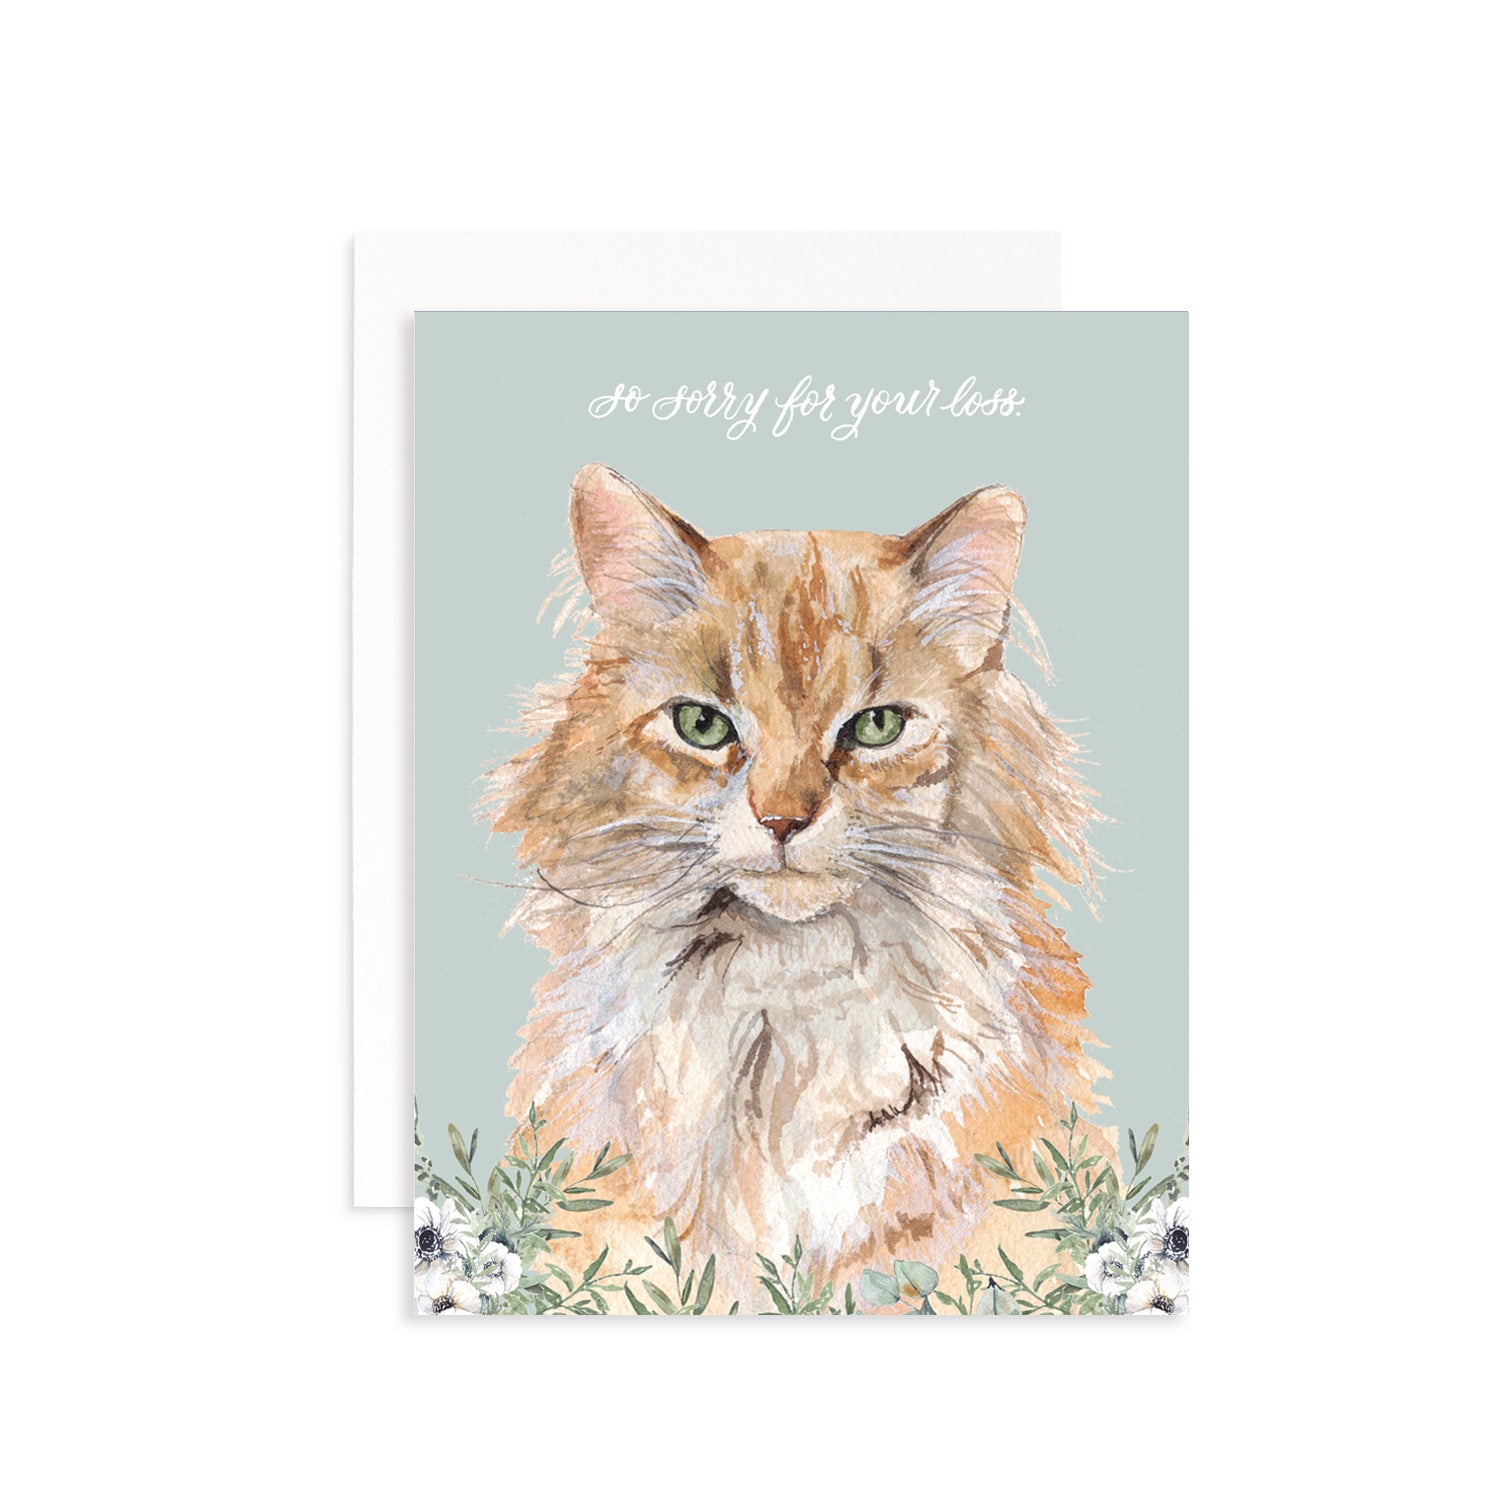 so-sorry-for-your-loss-cat-greeting-card-cami-monet